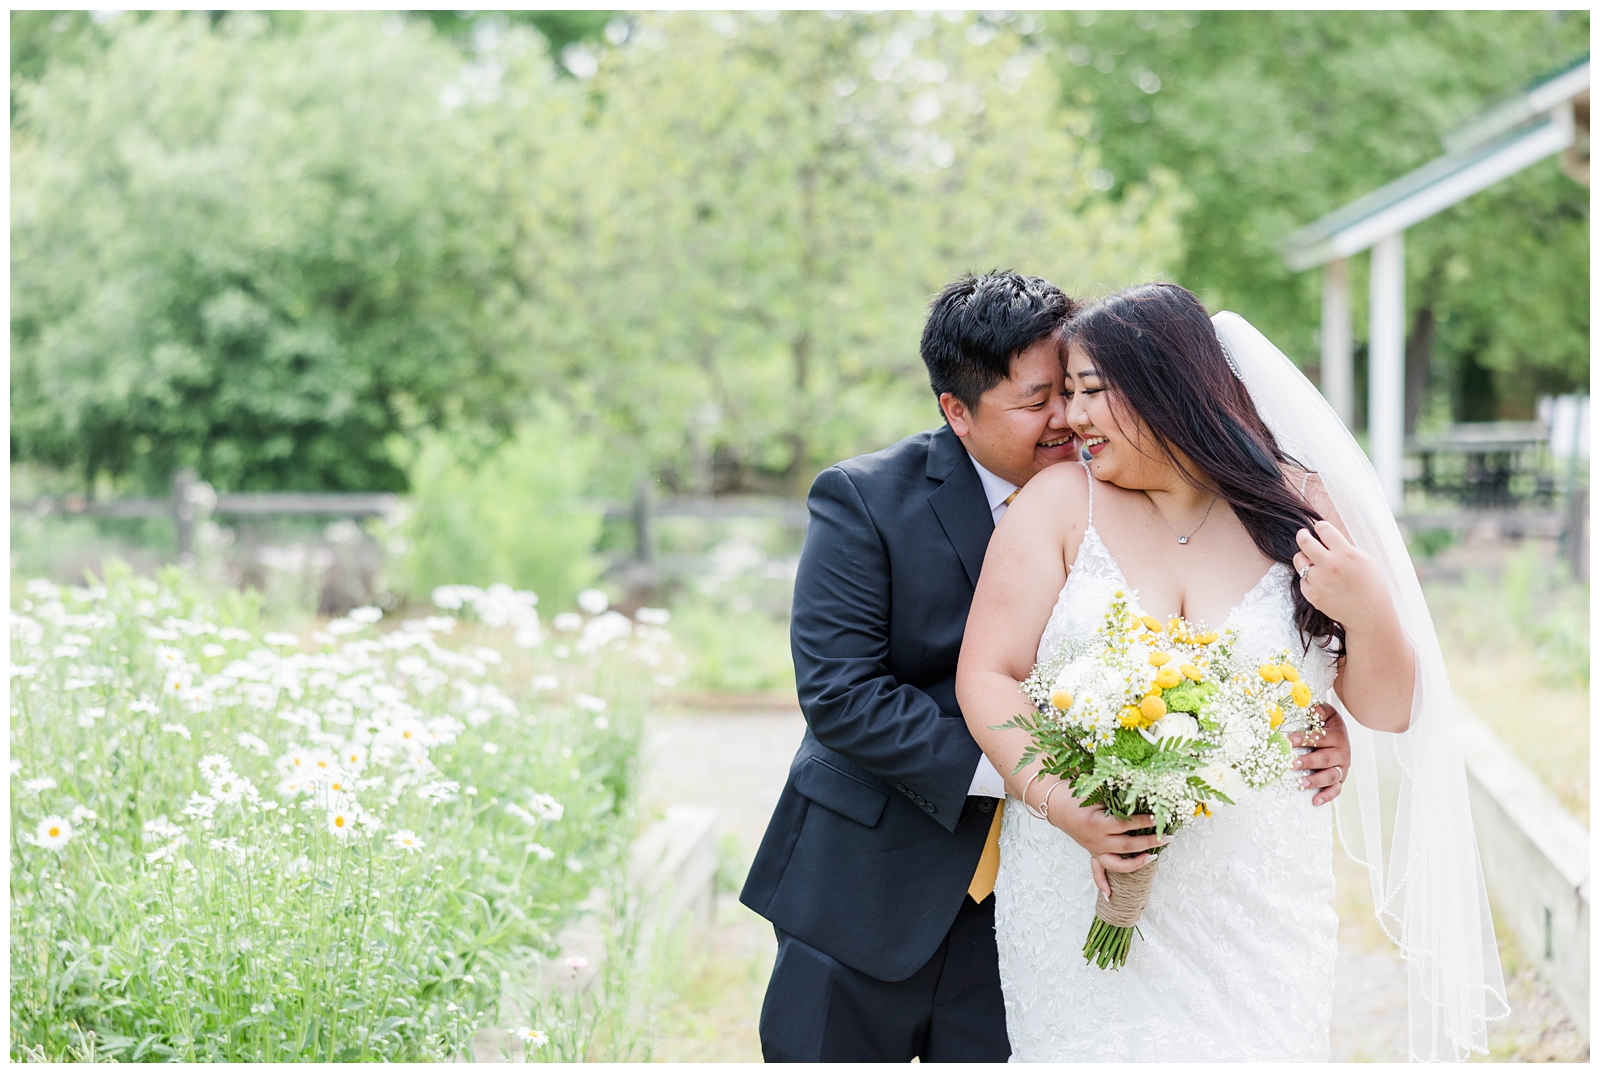 Bride and groom portraits on college campus